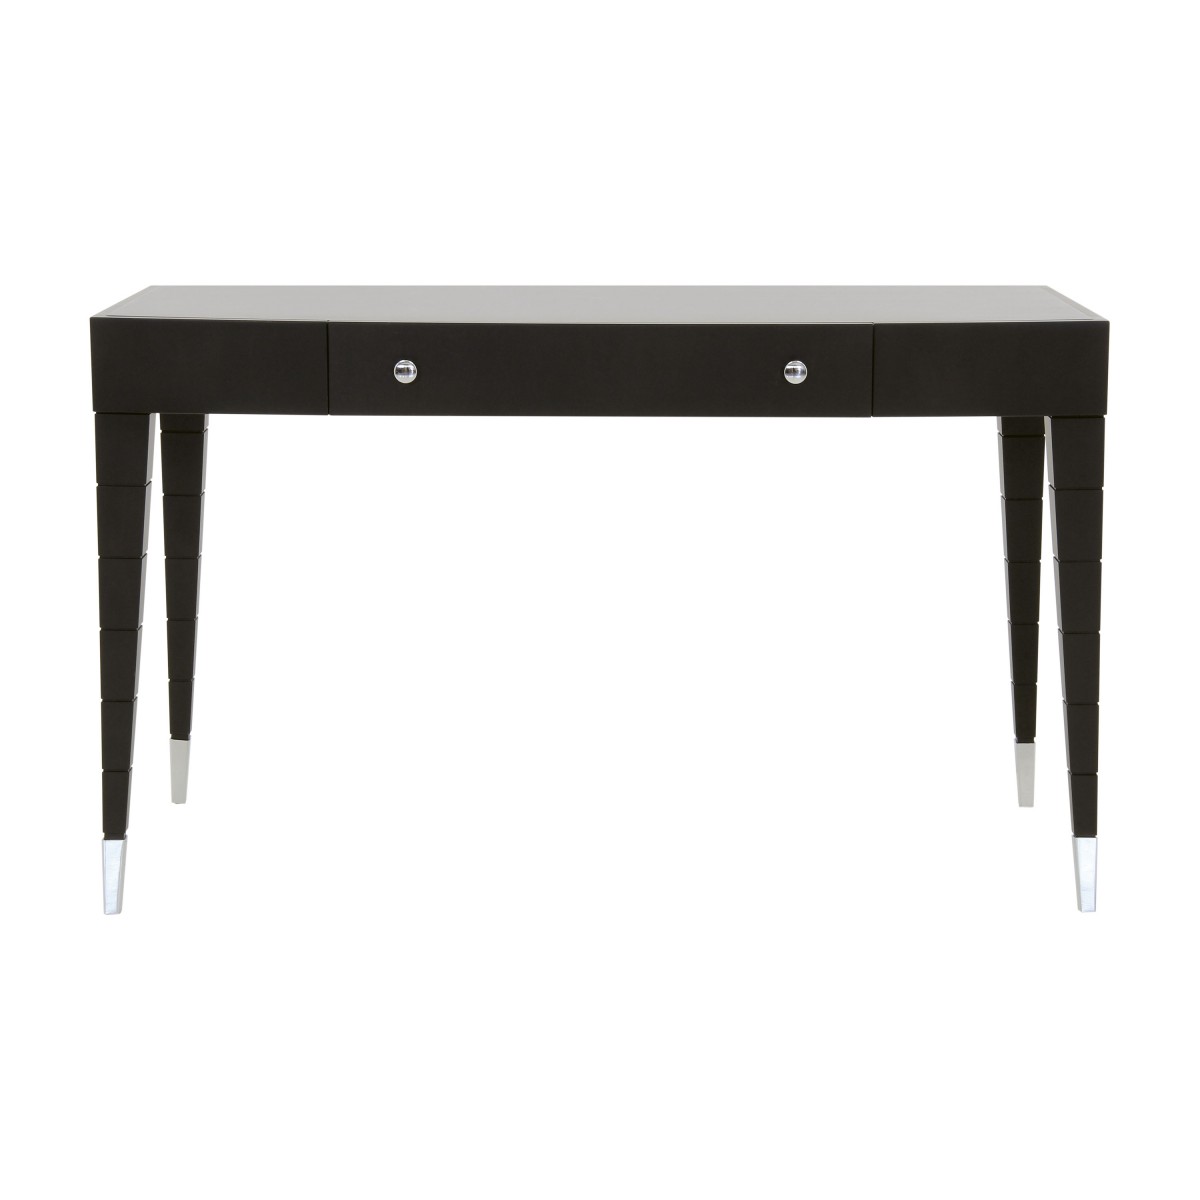 Contemporary Italian writing desk,1 drawer writing desk in wengè finish with chromed metal tip legs